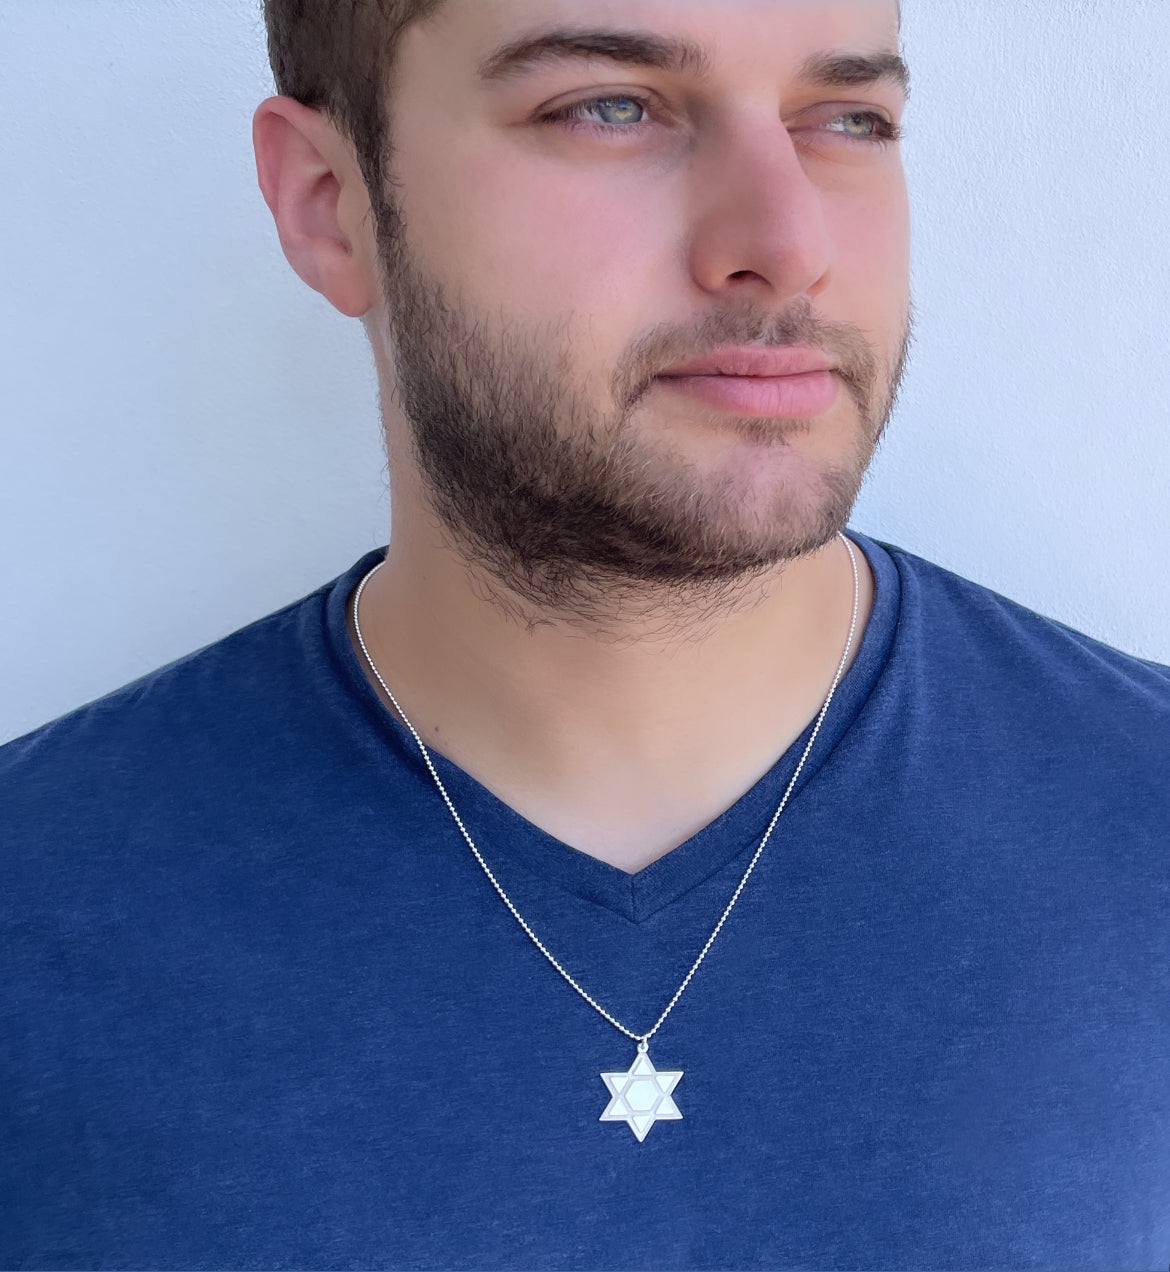 Star of One Magen David Necklace